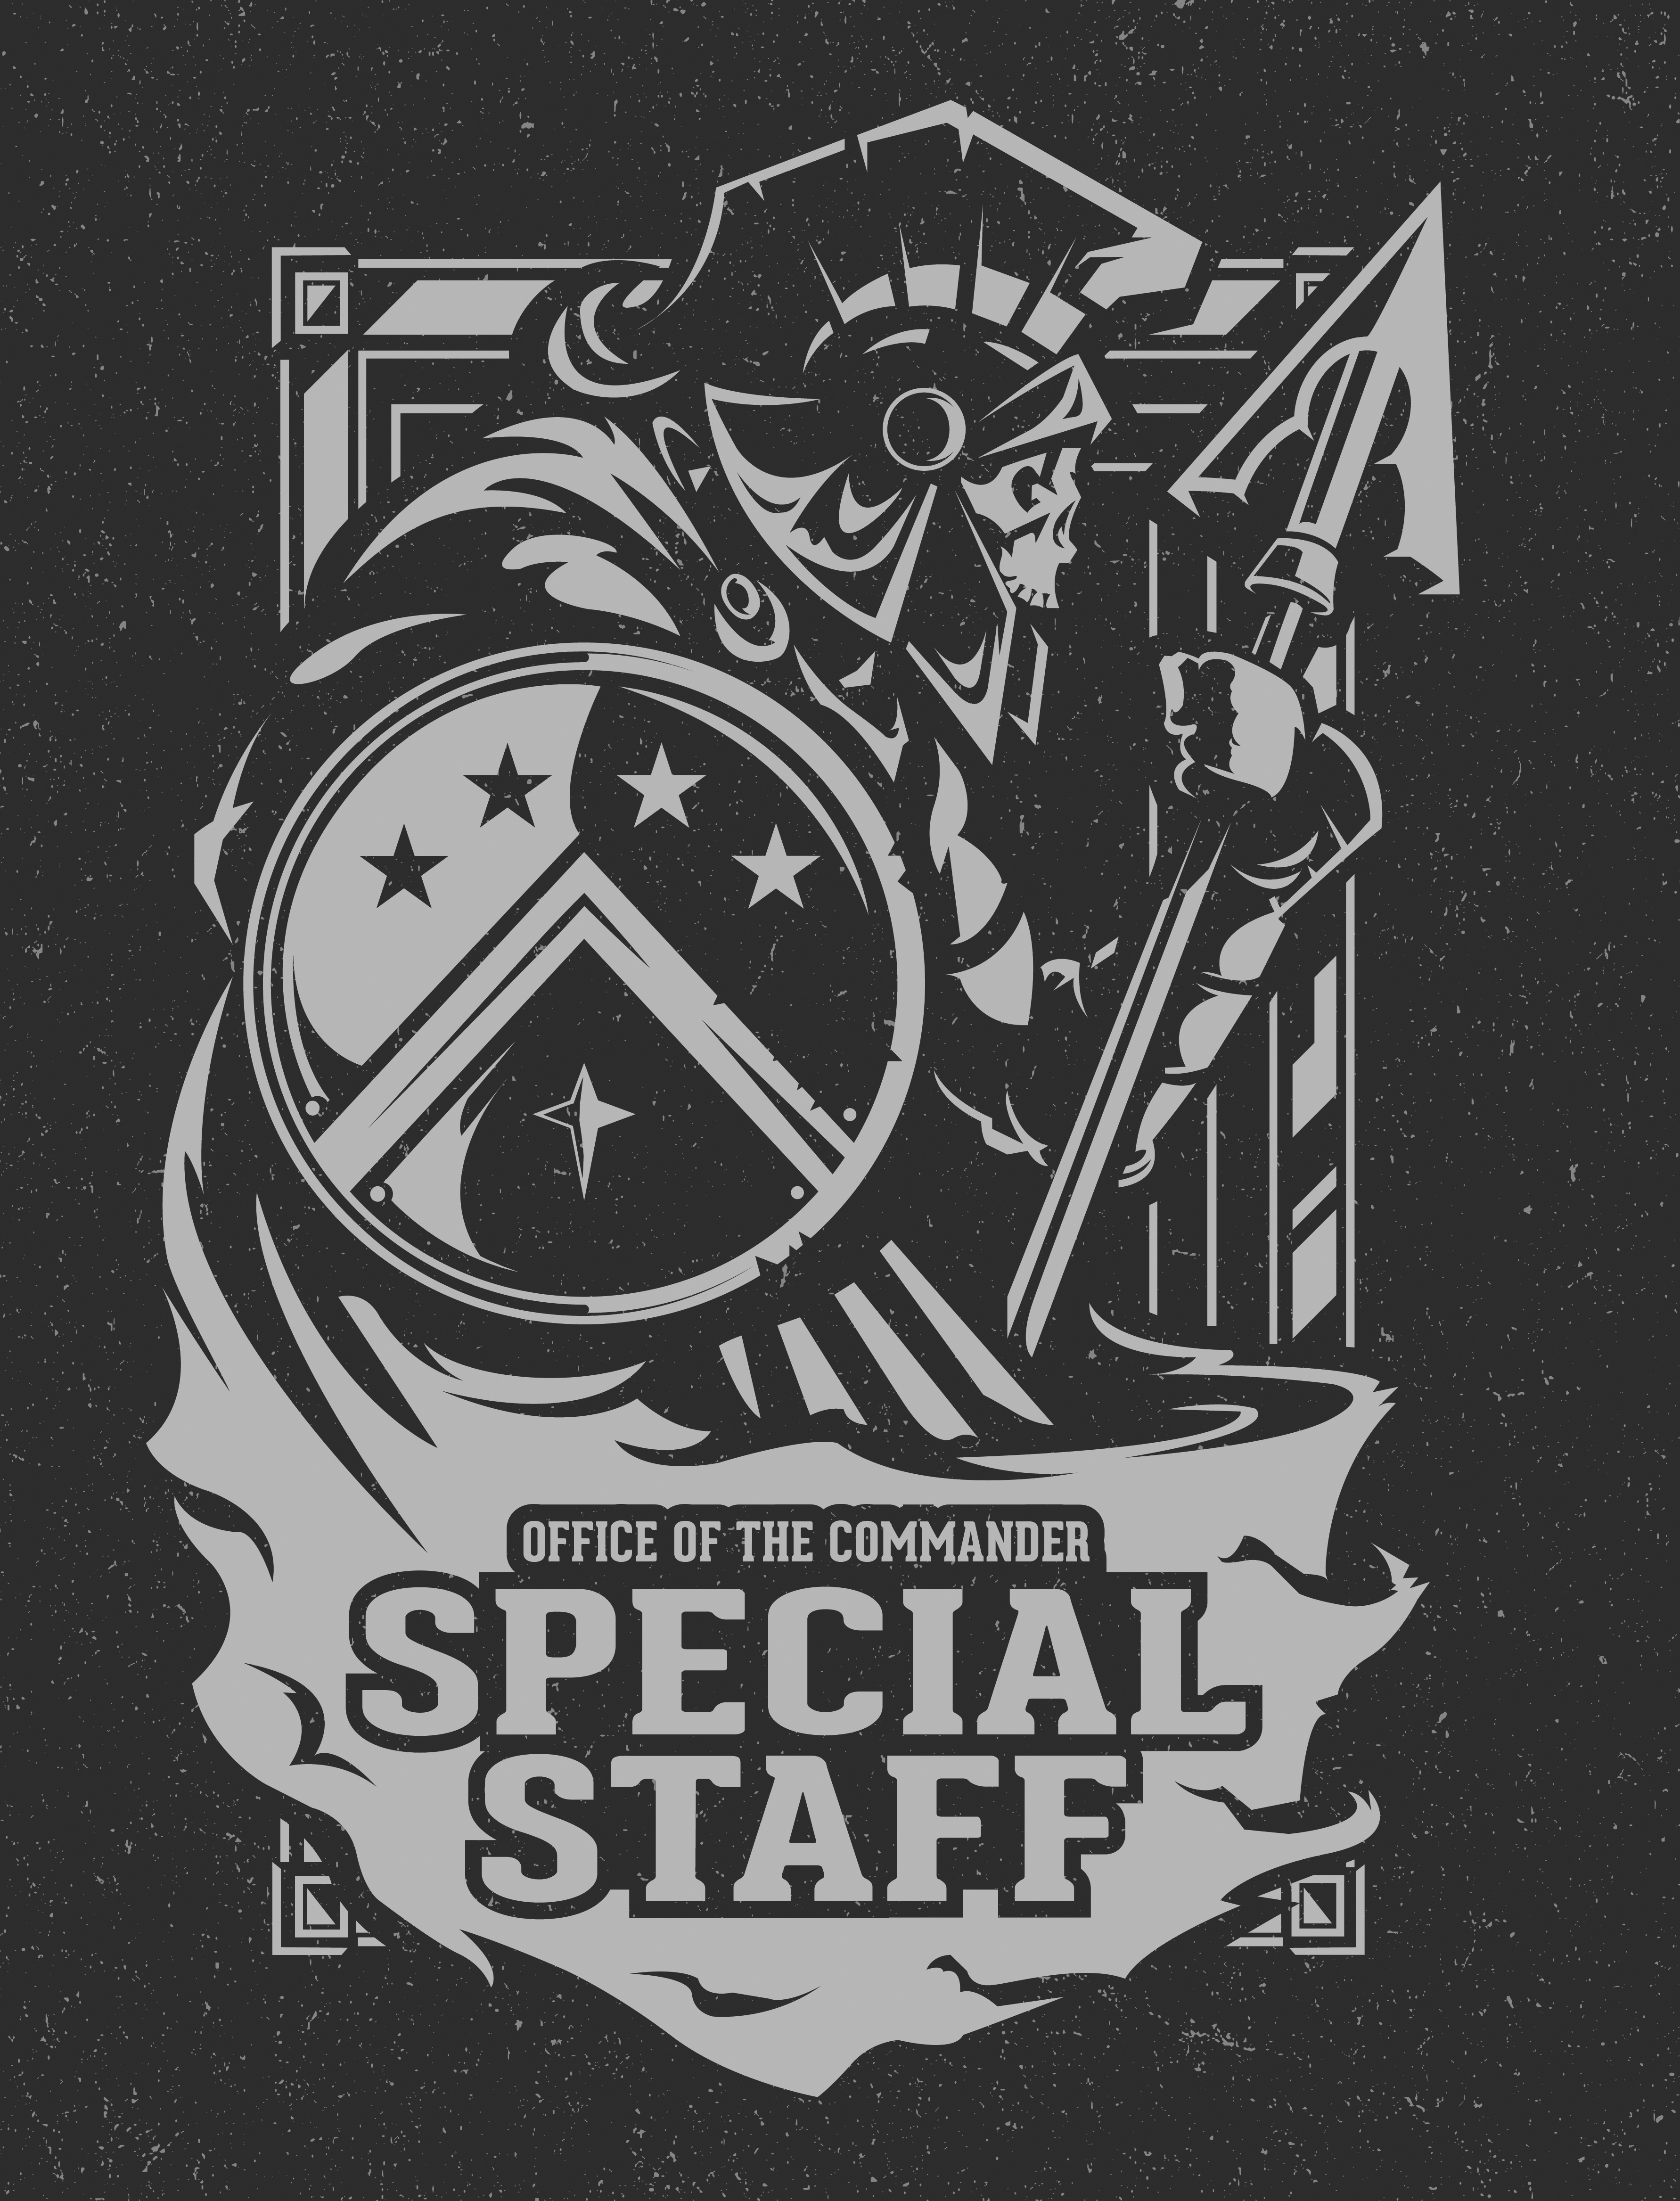 USSPACECOM Office of the Commander - J0 Special Staff crest